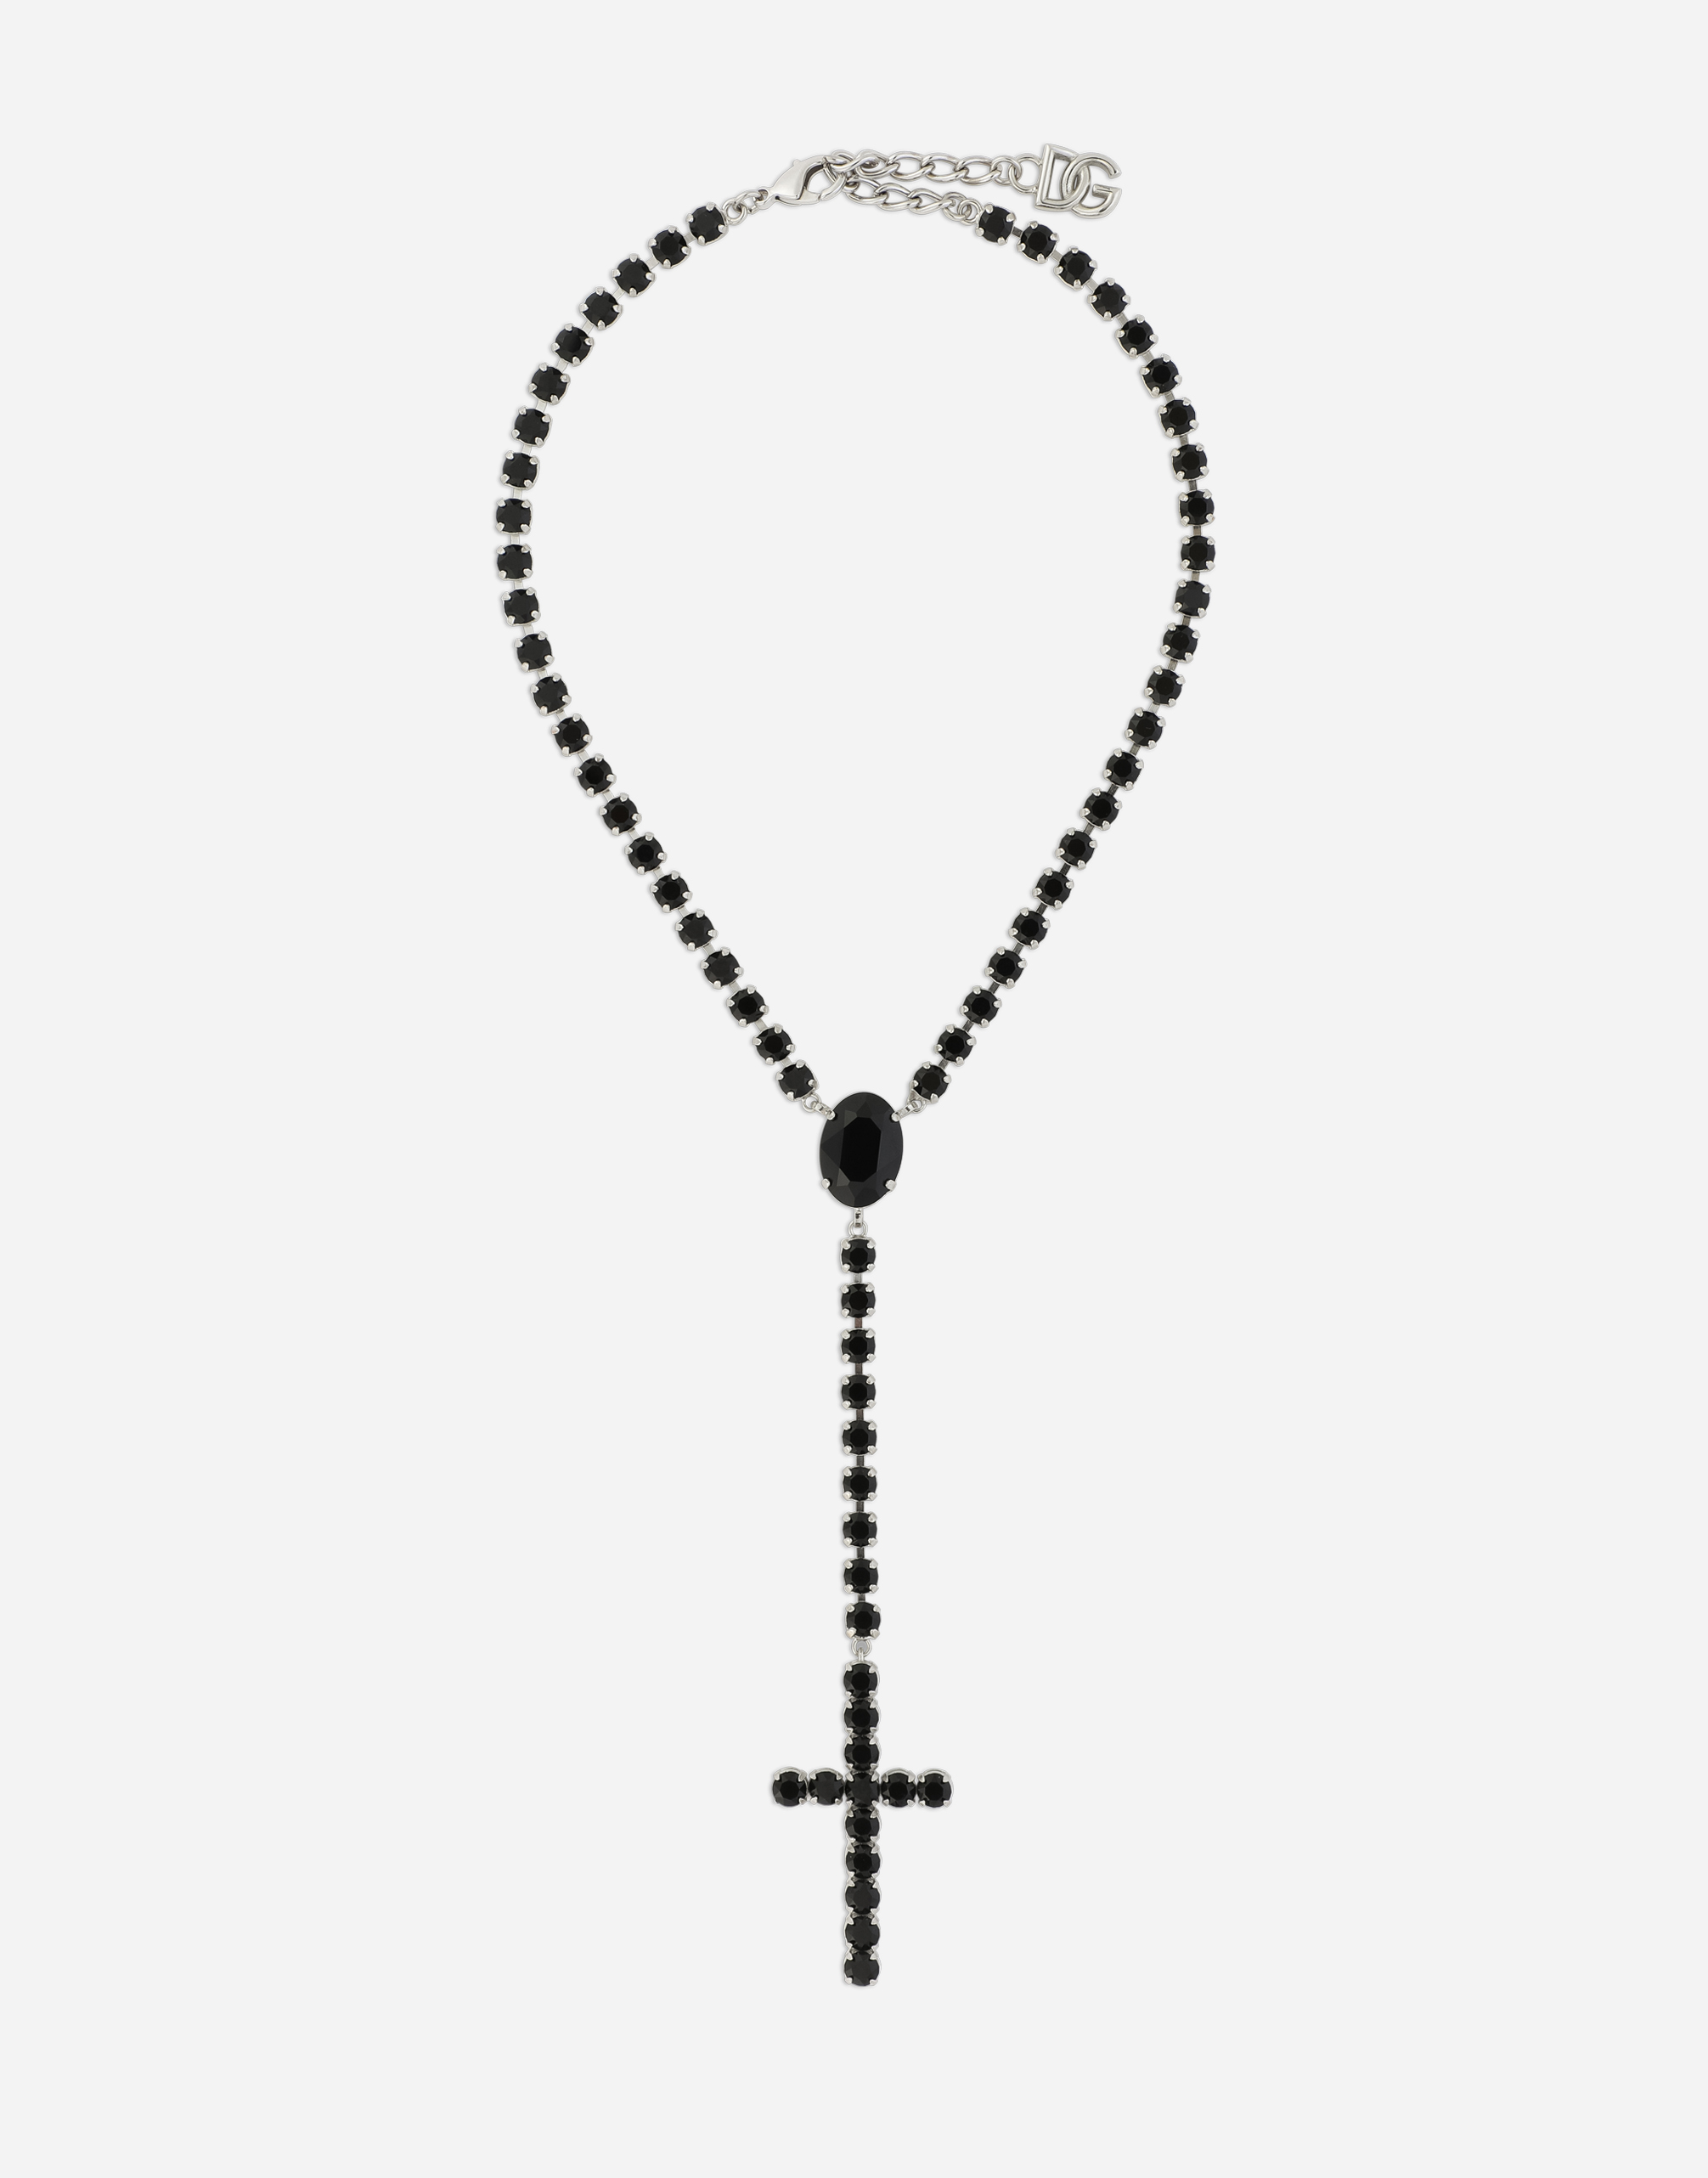 KIM DOLCE&GABBANA Rosary necklace with crystal rhinestones in Black